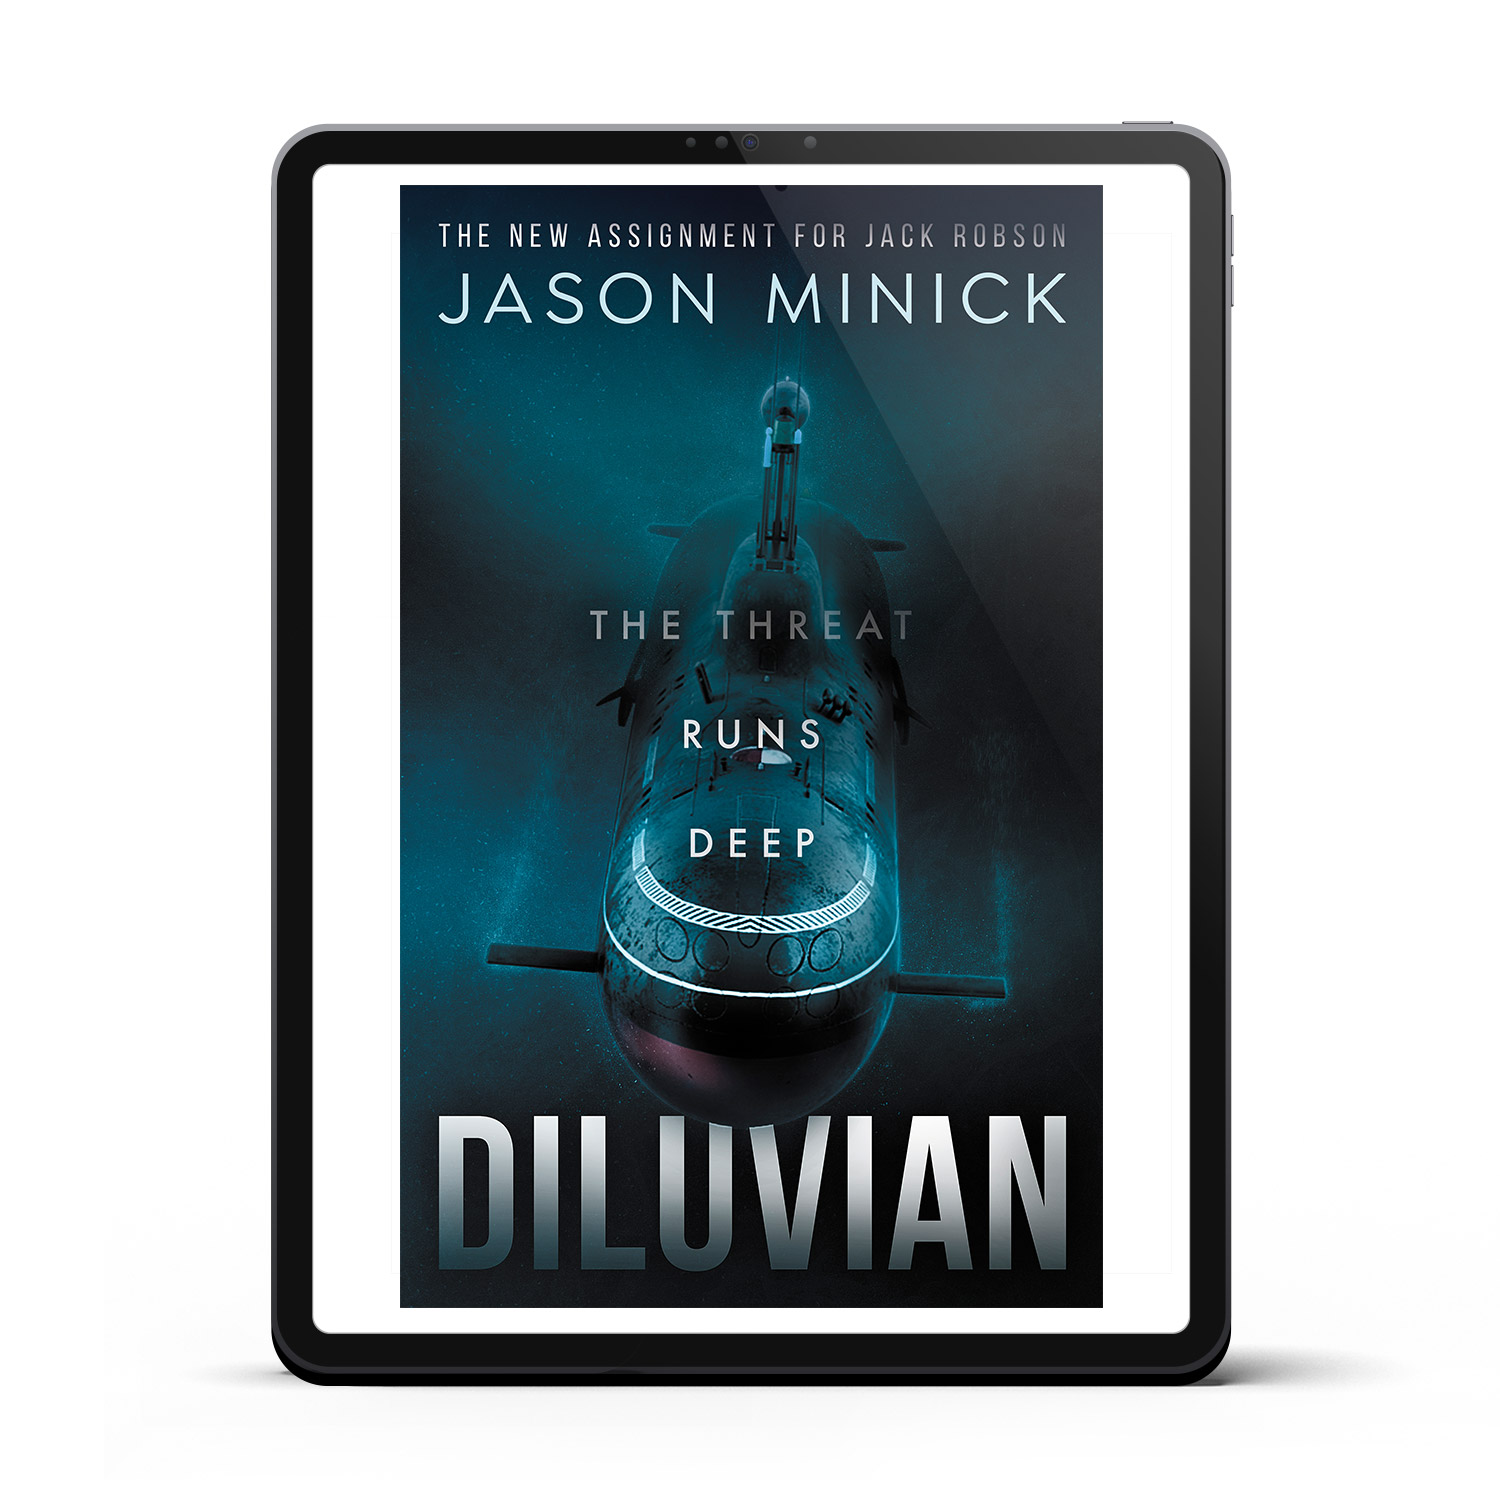 'DILUVIAN' is a secretive thriller on an epic scale, by Jason Minick. The book cover and interior were designed by Mark Thomas, of coverness.com. To find out more about my book design services, please visit www.coverness.com.